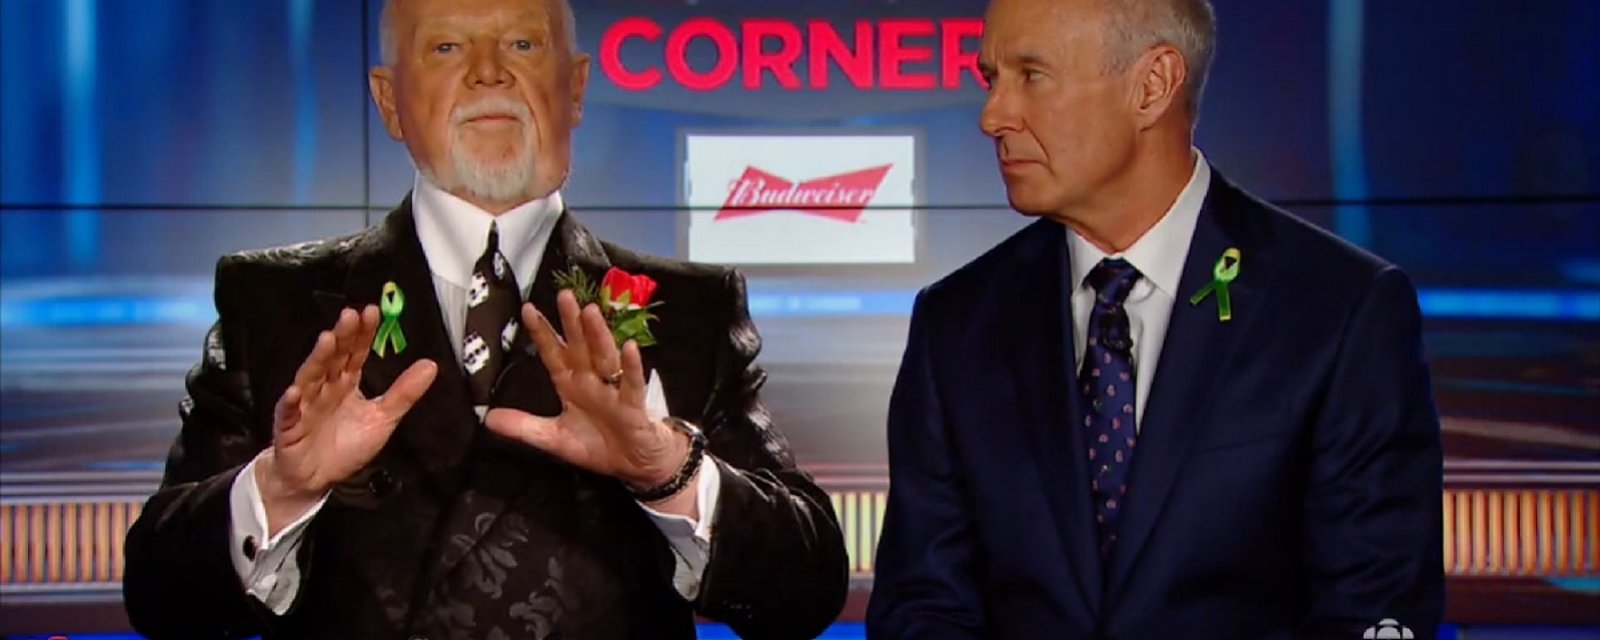 Ron MacLean sinks to new low in treatment of Don Cherry.